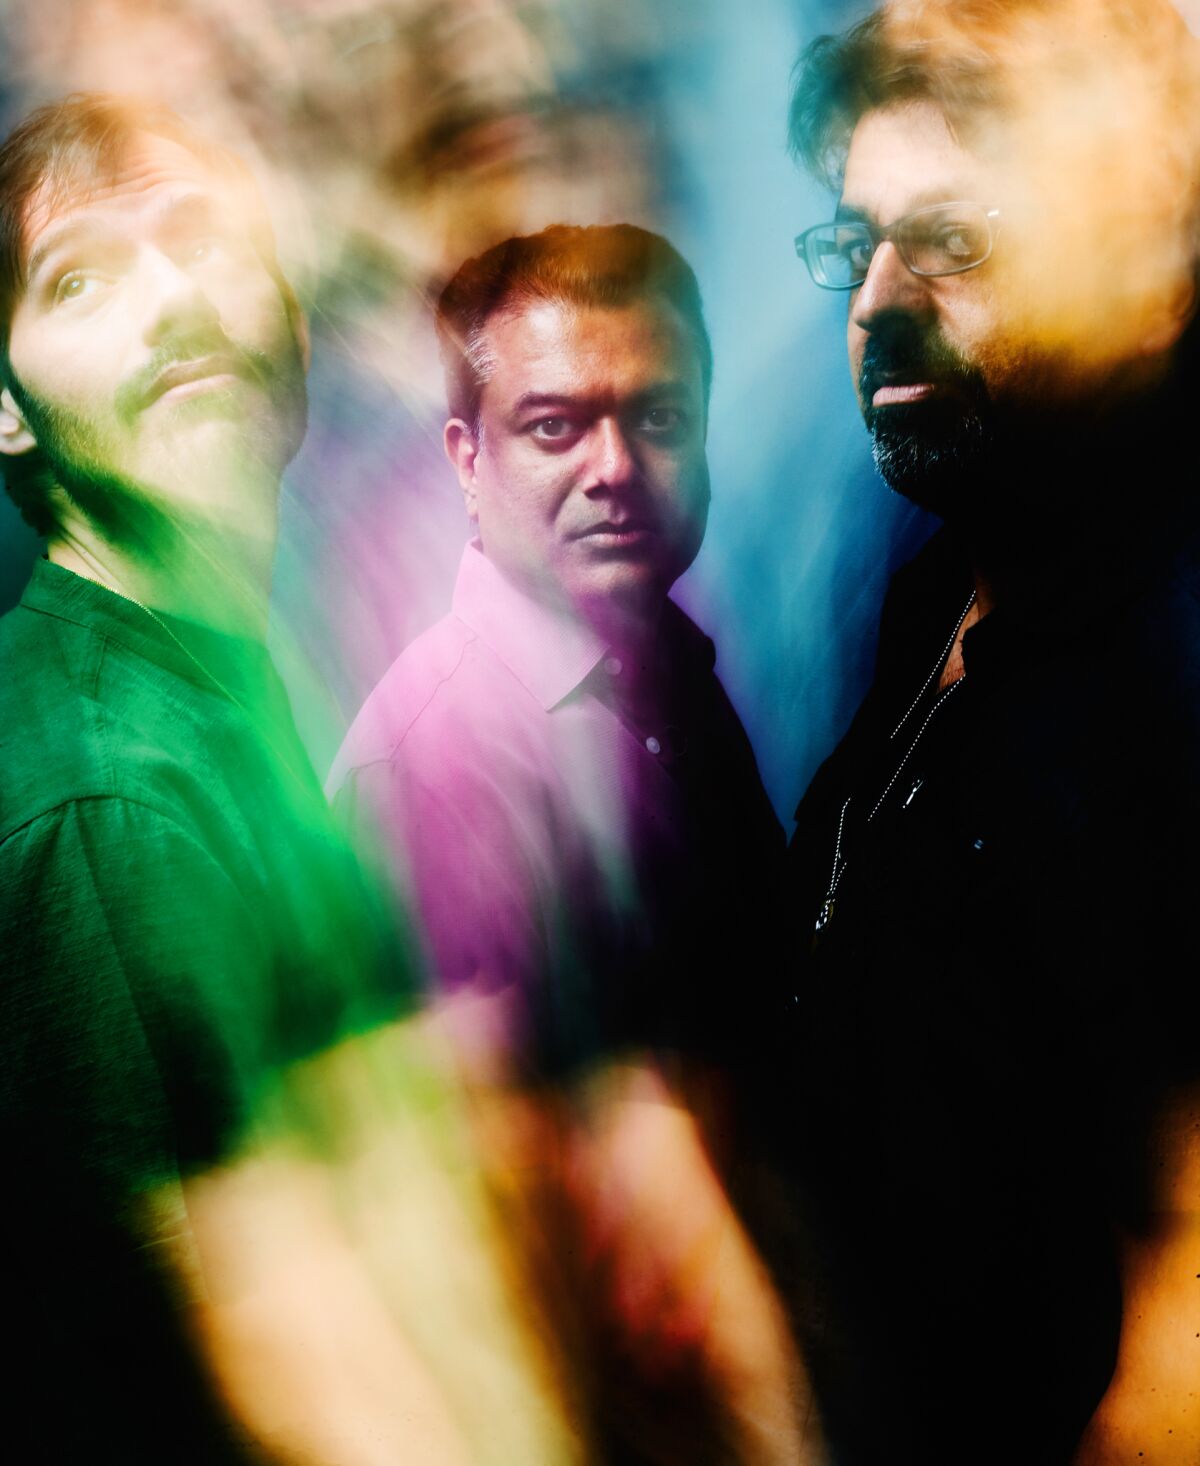 The members of the band Indo-Pak Coalition are, from left, drummer and percussionist Dan Weiss, saxophonist Rudresh Mahanthappa and guitarist Rez Abbasi.